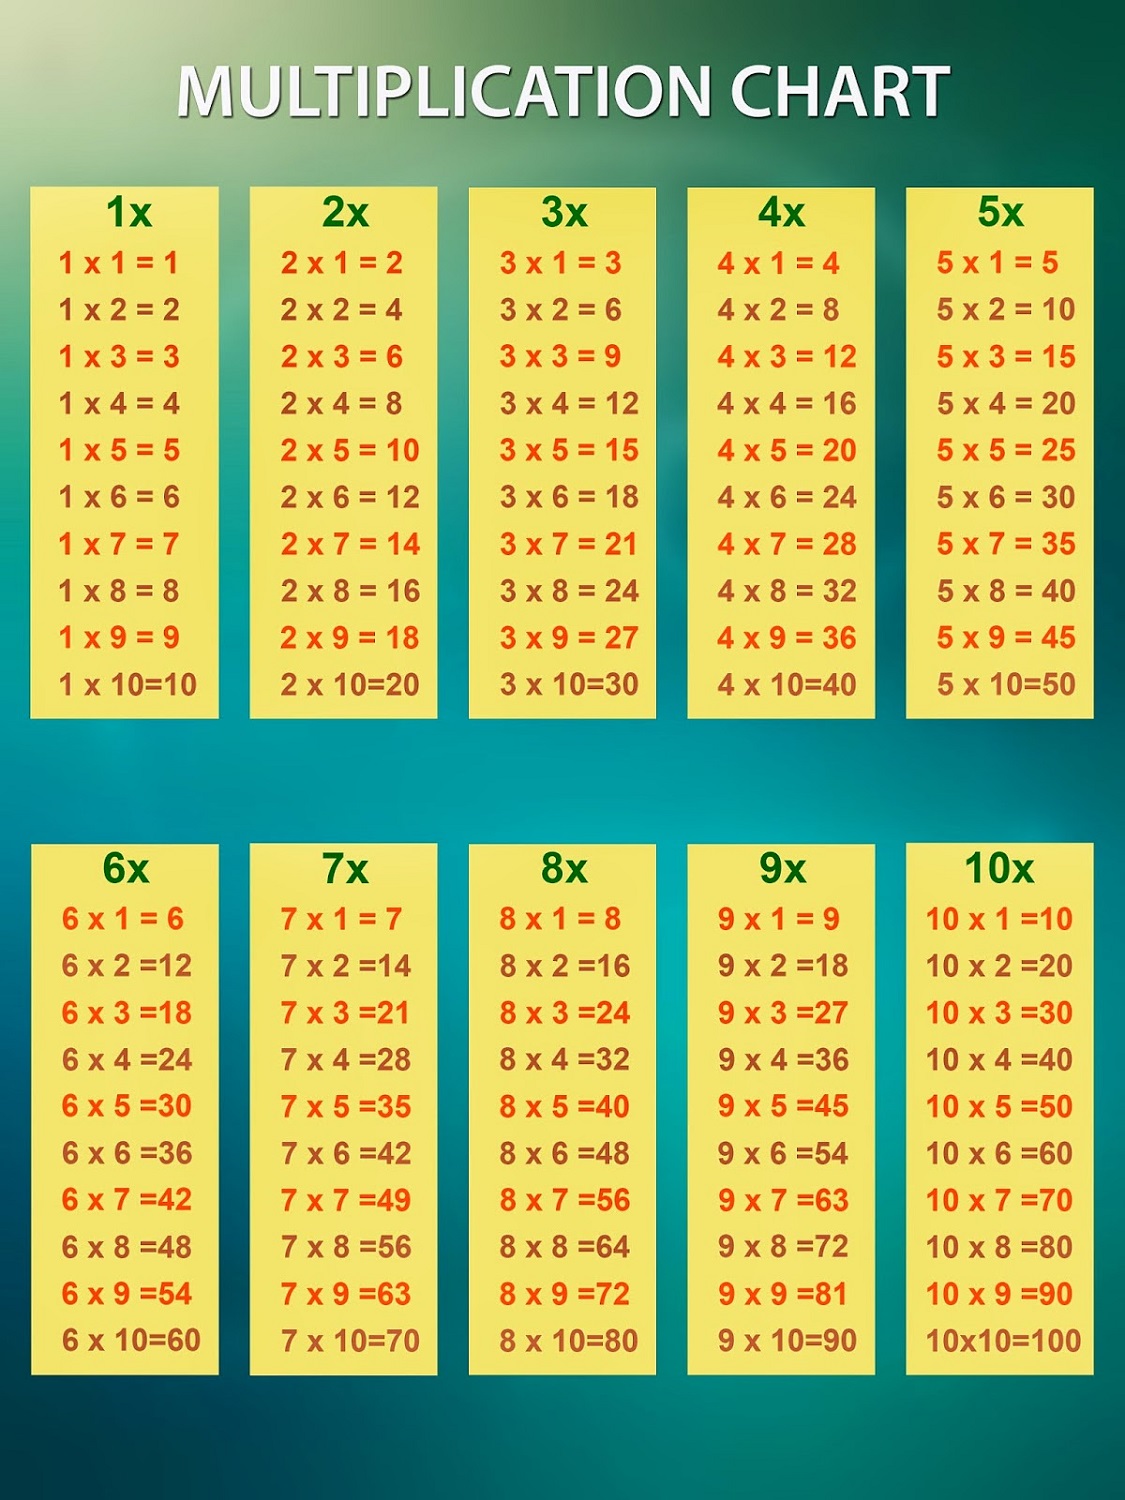 times table charts multiplication